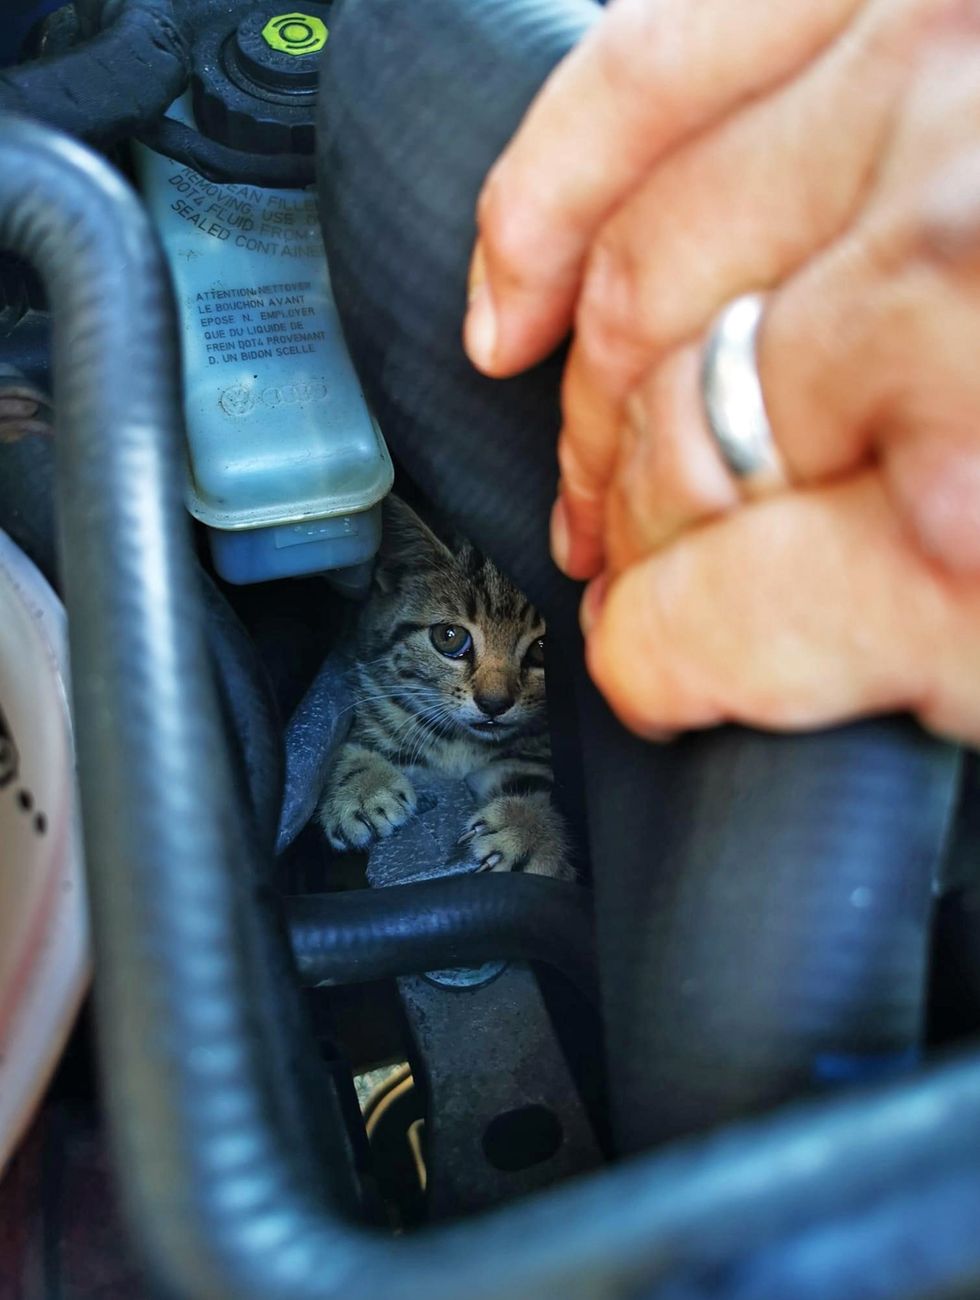 Navy helicopter engineer dismantles car to rescue stray kitten trapped inside